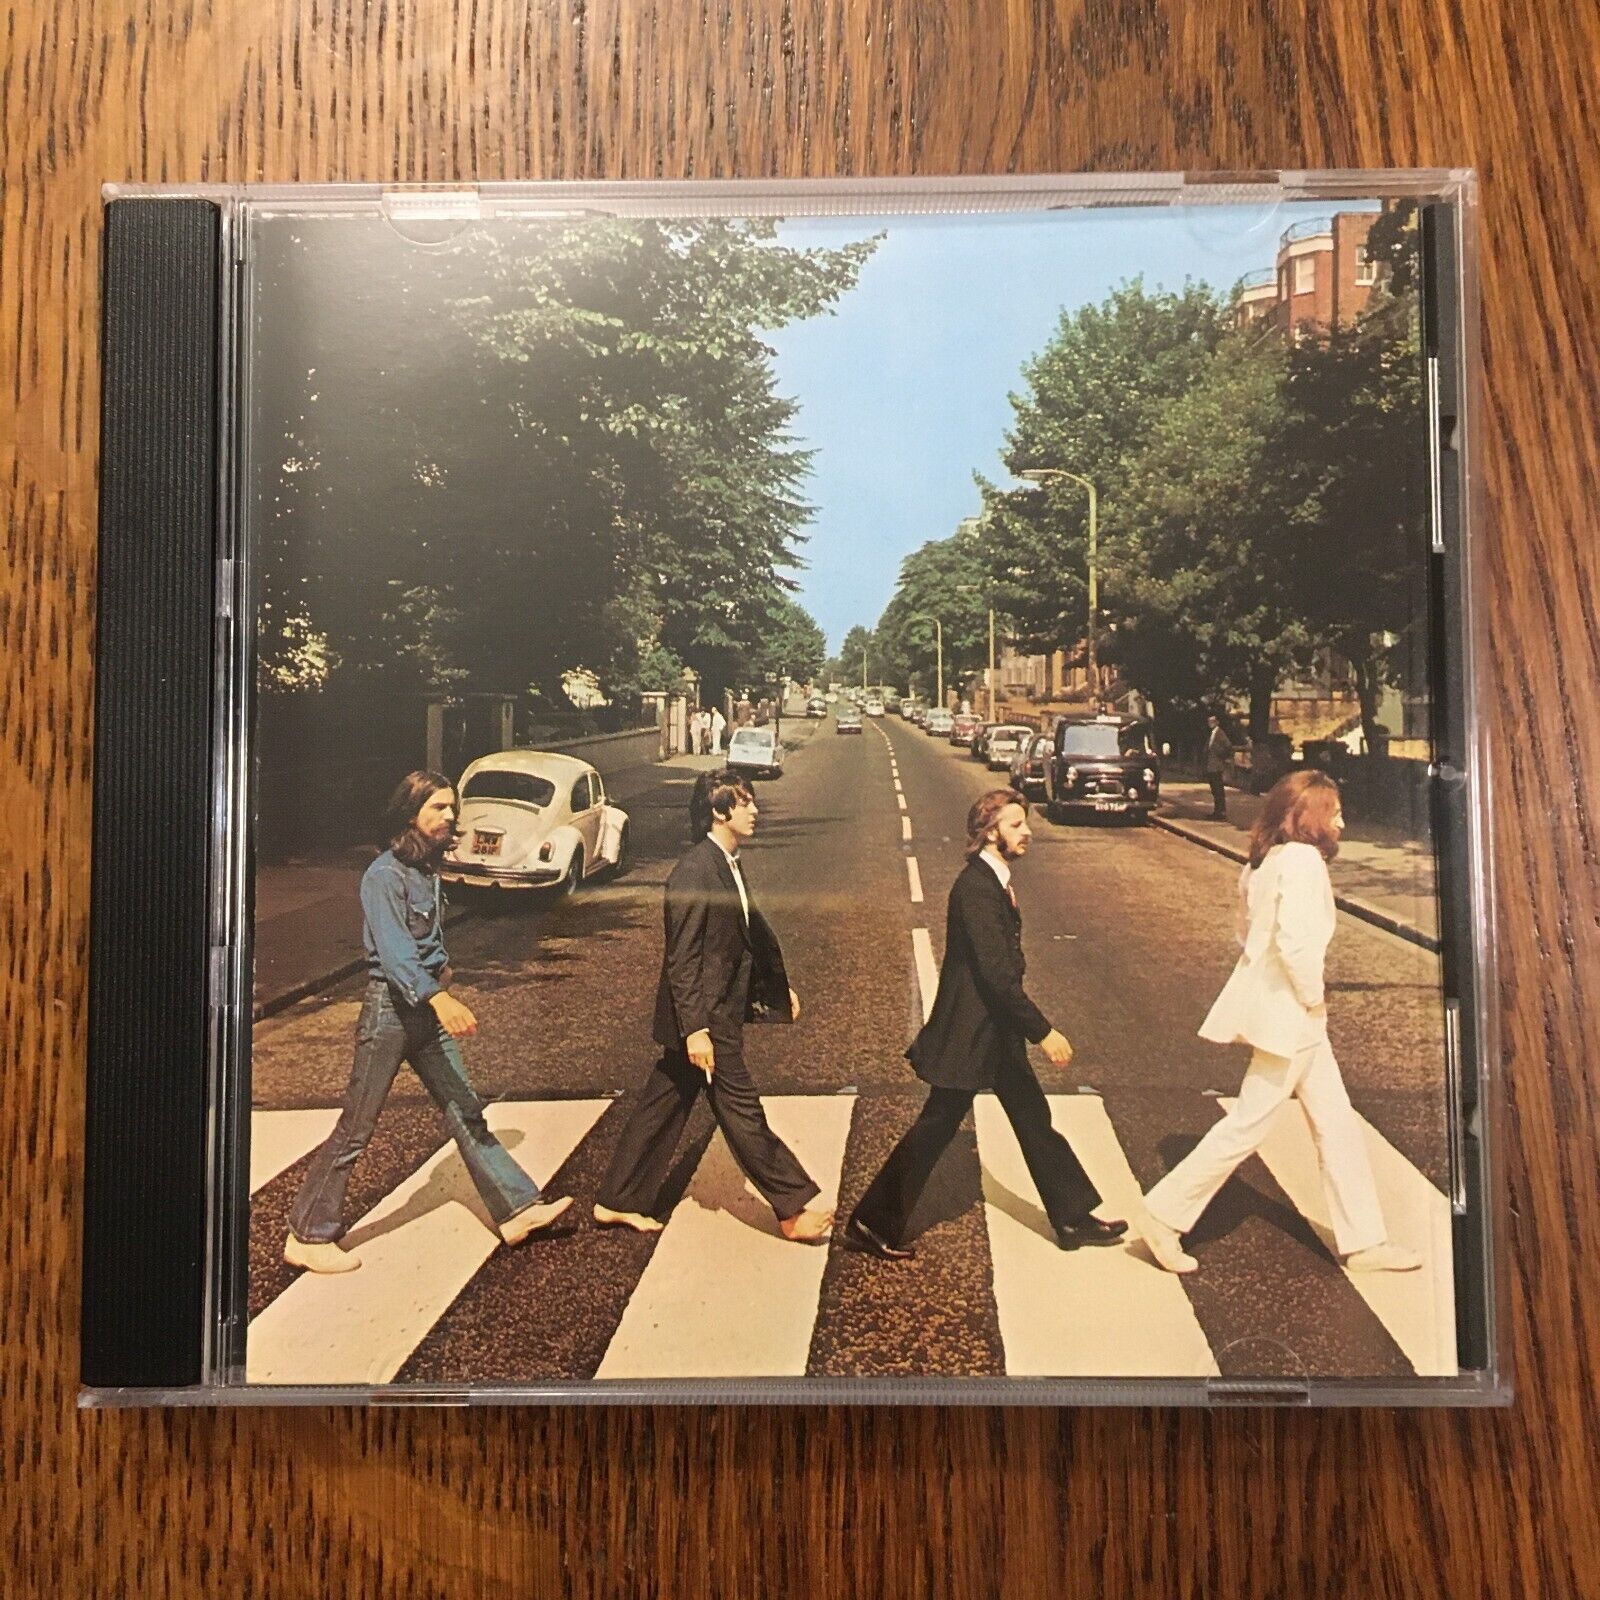 Abbey Road by The Beatles (CD, 1987) MADE IN ITALY STEREO 7 46446 2 VERY GOOD